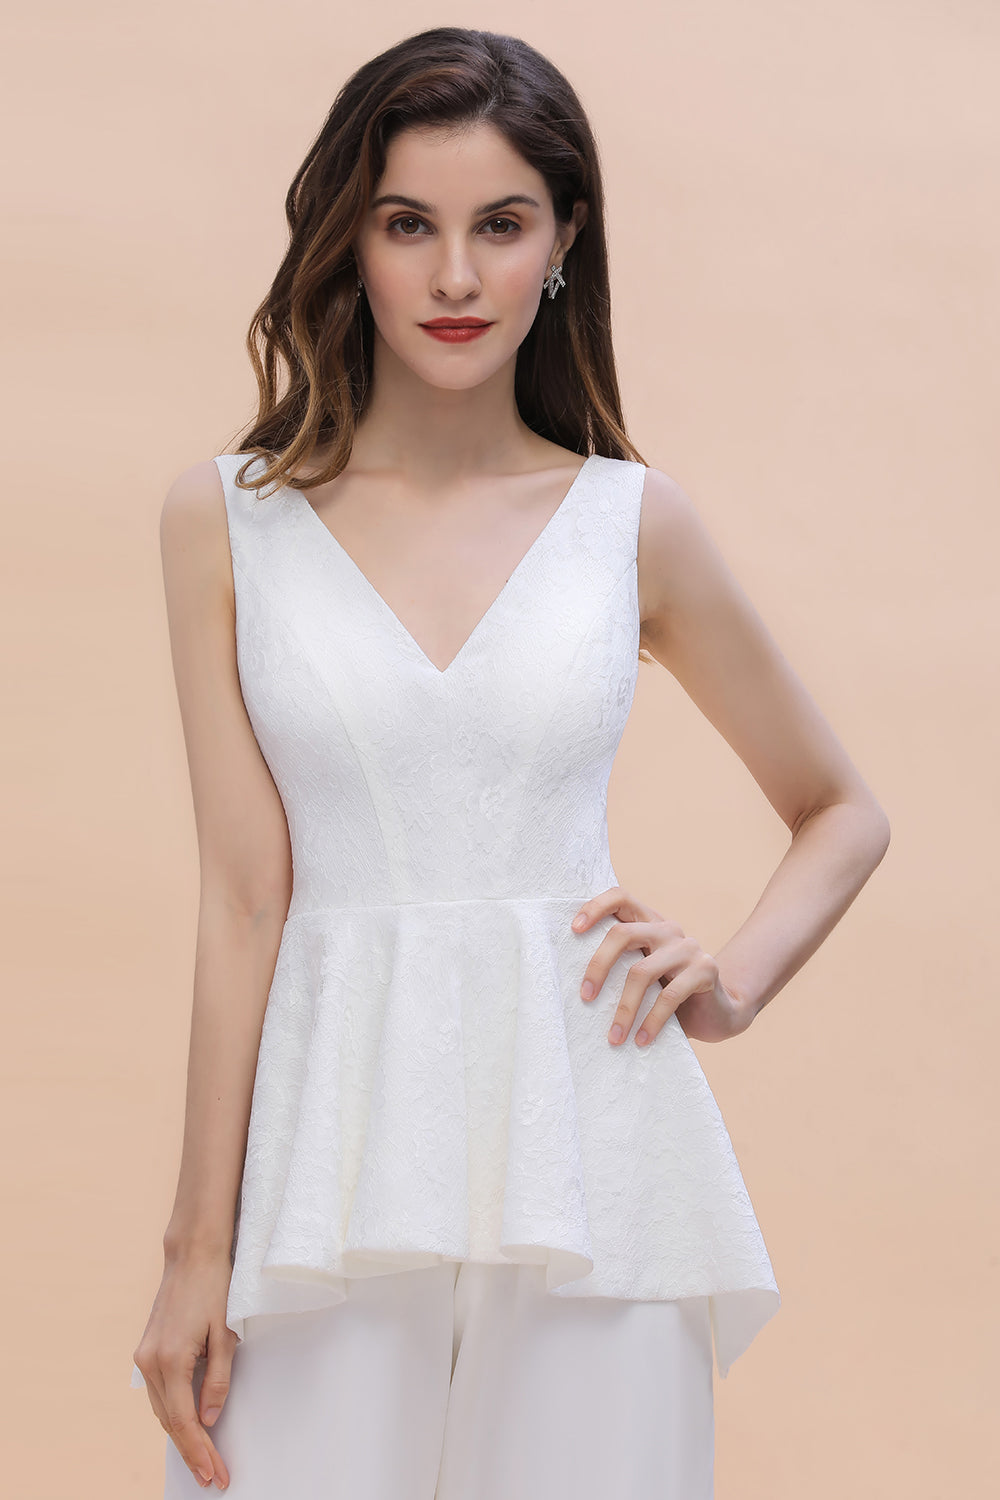 Load image into Gallery viewer, Long White V-neck Chifffon Bridesmaid Dress Jumpsuit With Sash-BIZTUNNEL
